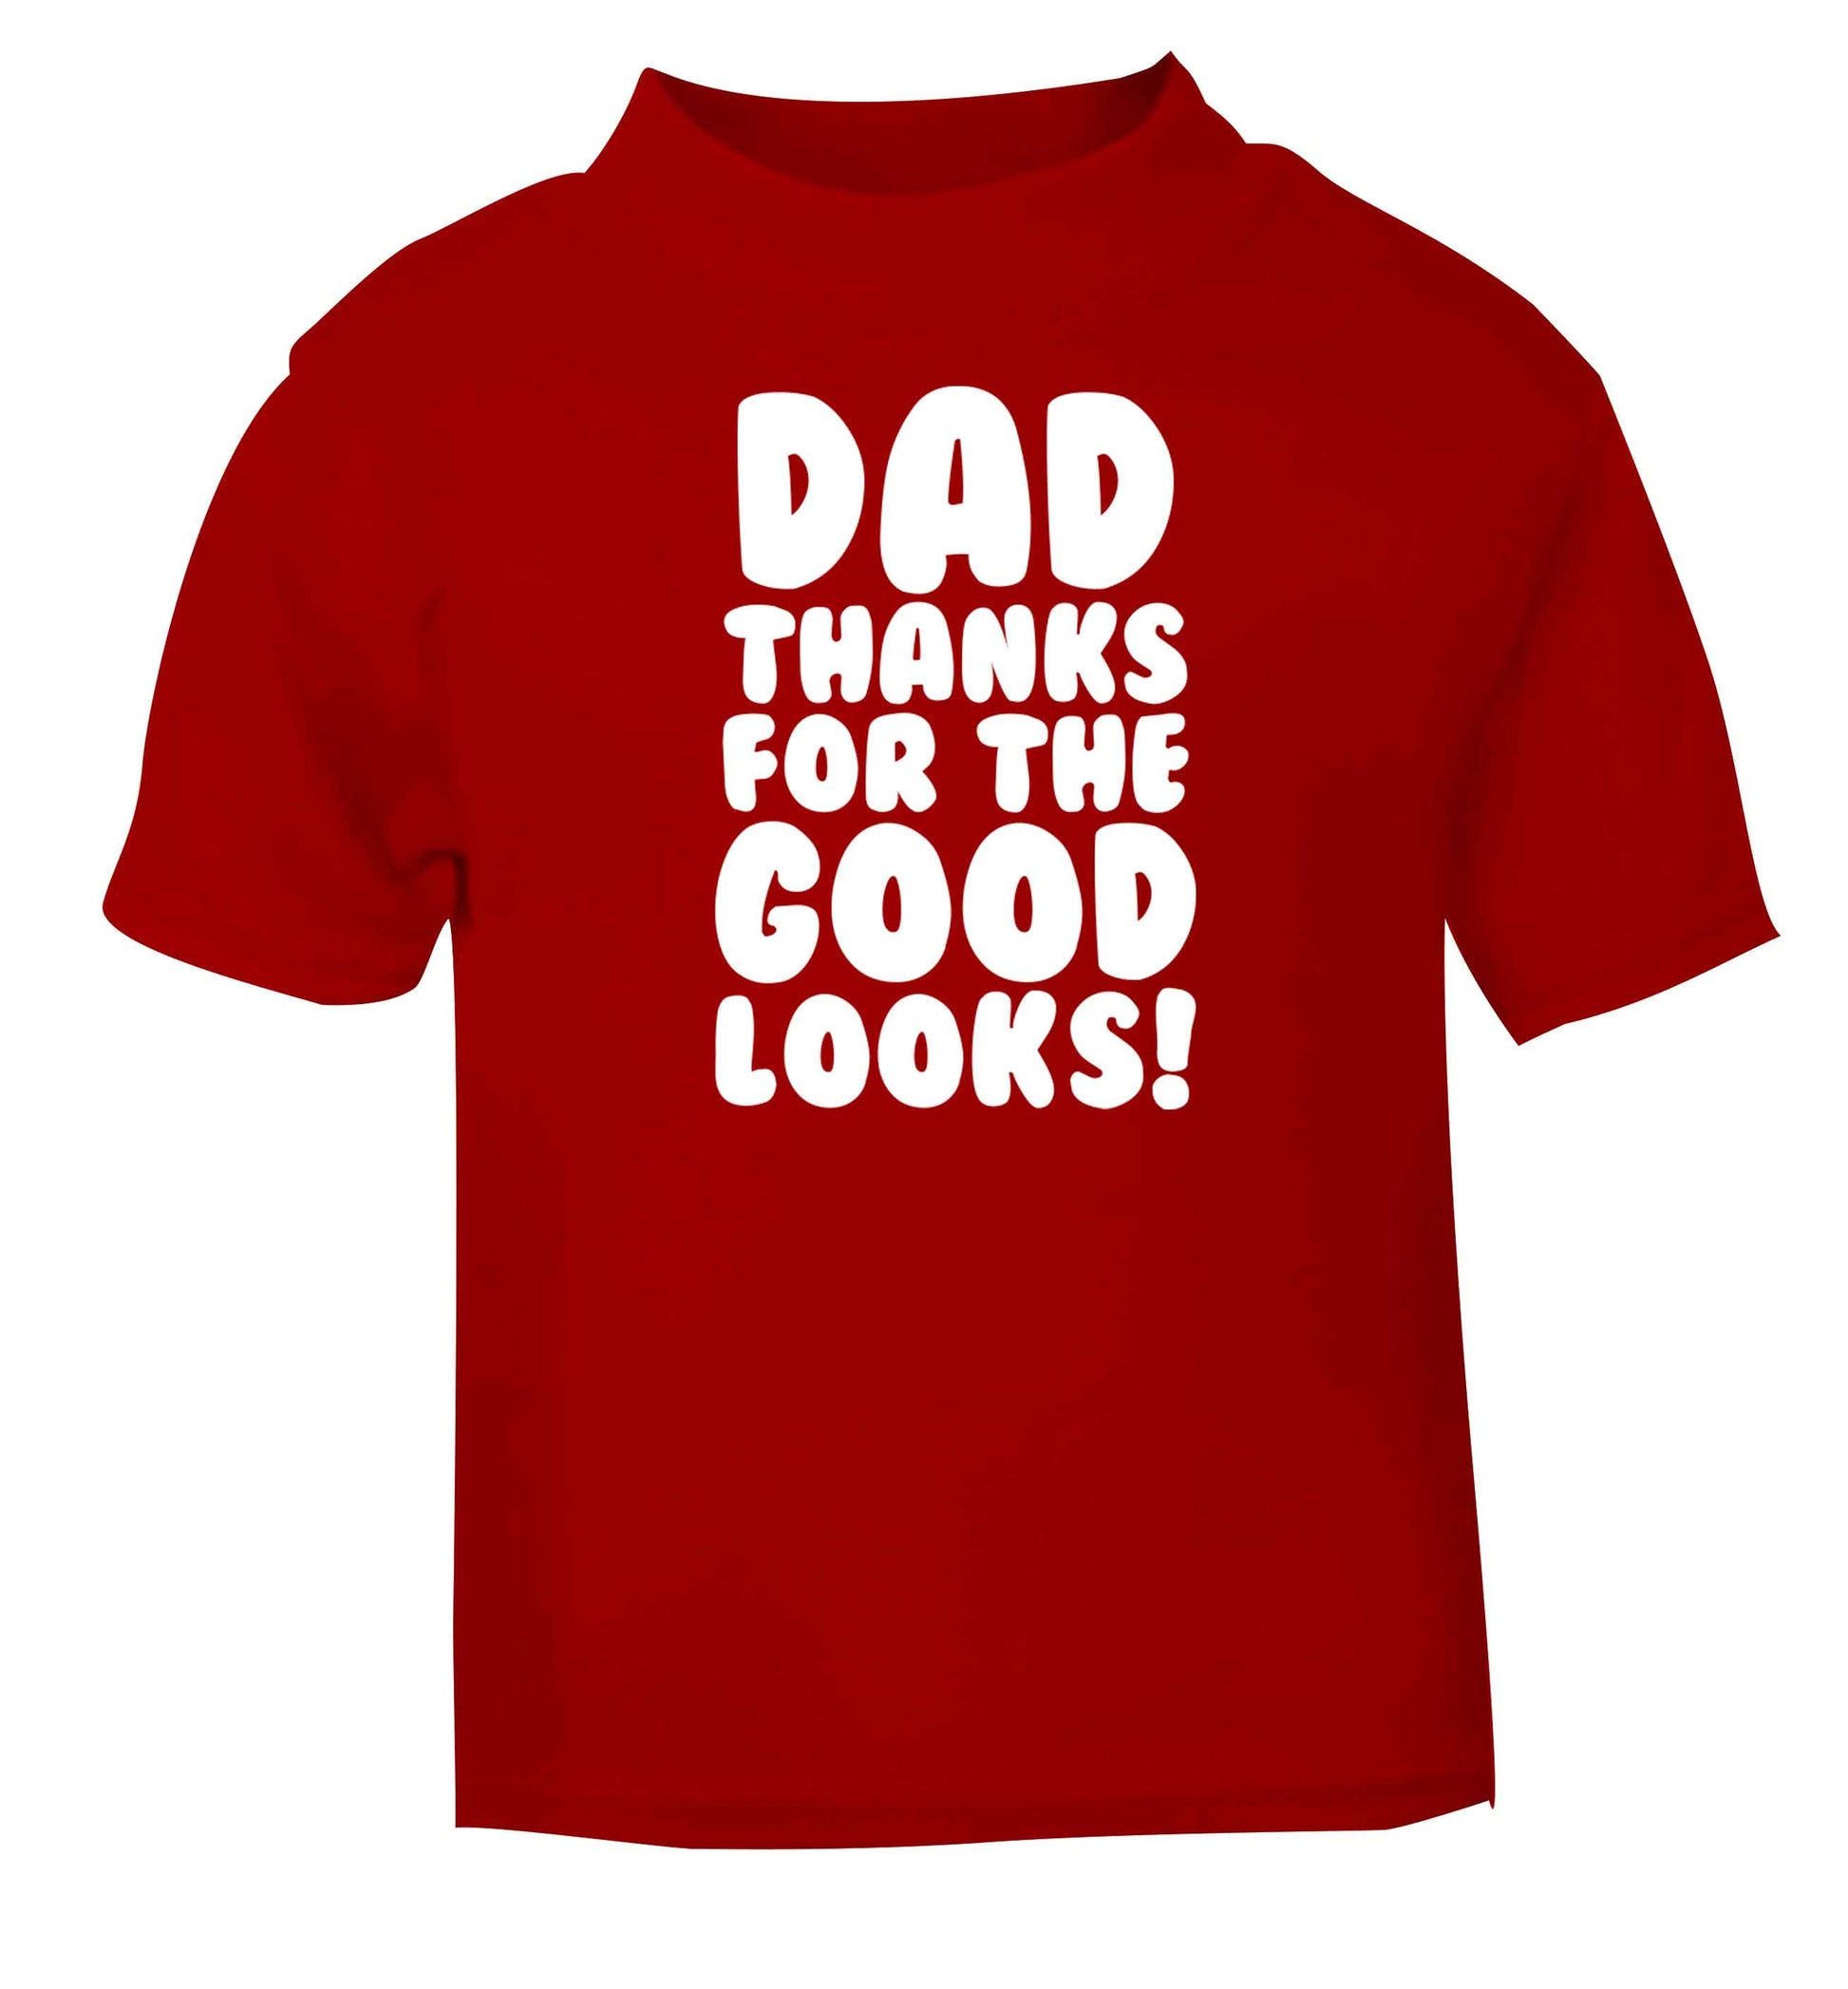 Dad thanks for the good looks red baby toddler Tshirt 2 Years